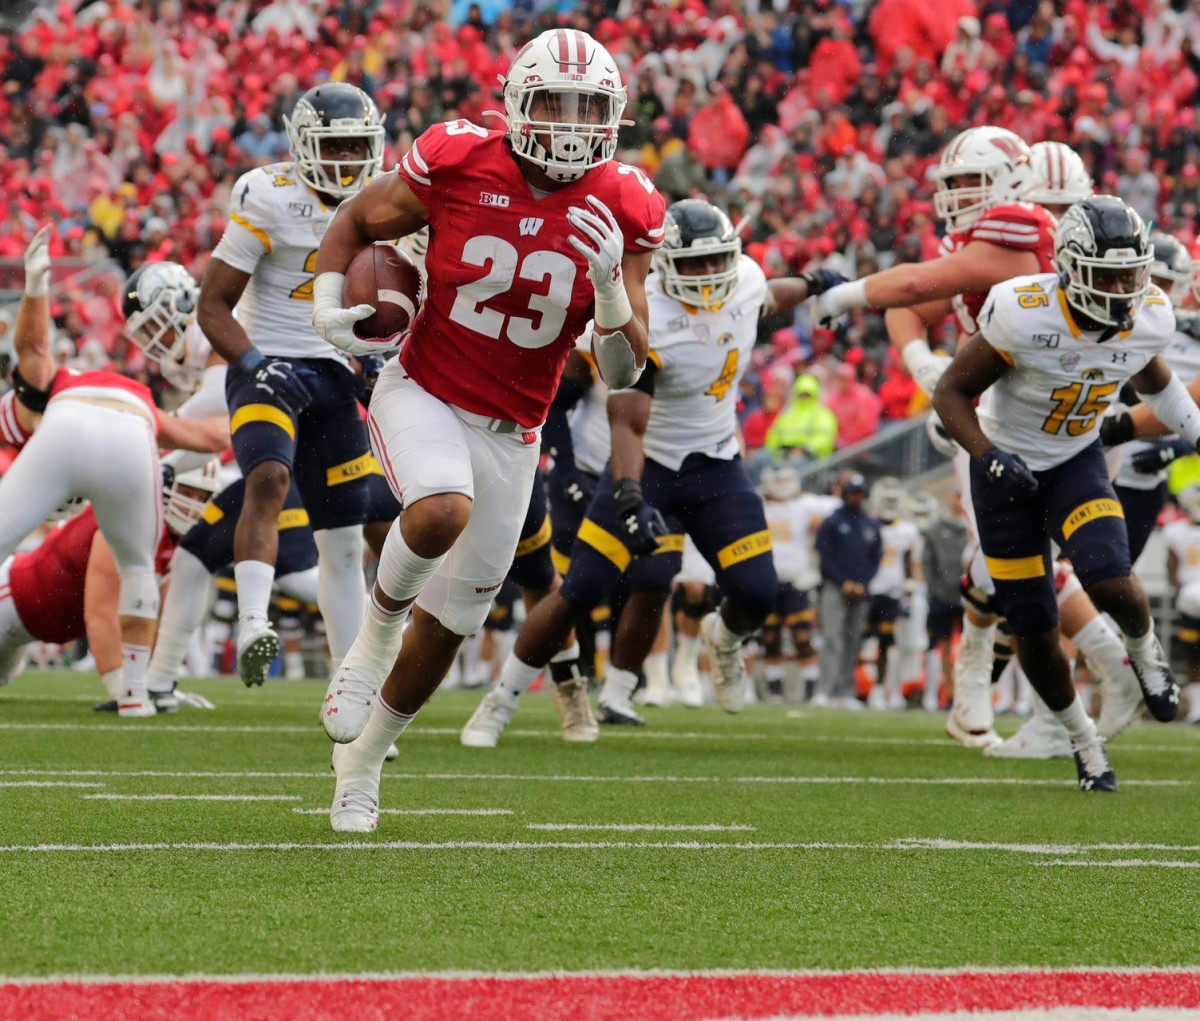 Wisconsin running back Jonathan Taylor, selected in the second round by the Indianapolis Colts, is a popular NFL fantasy pick for his rookie debut in 2020.